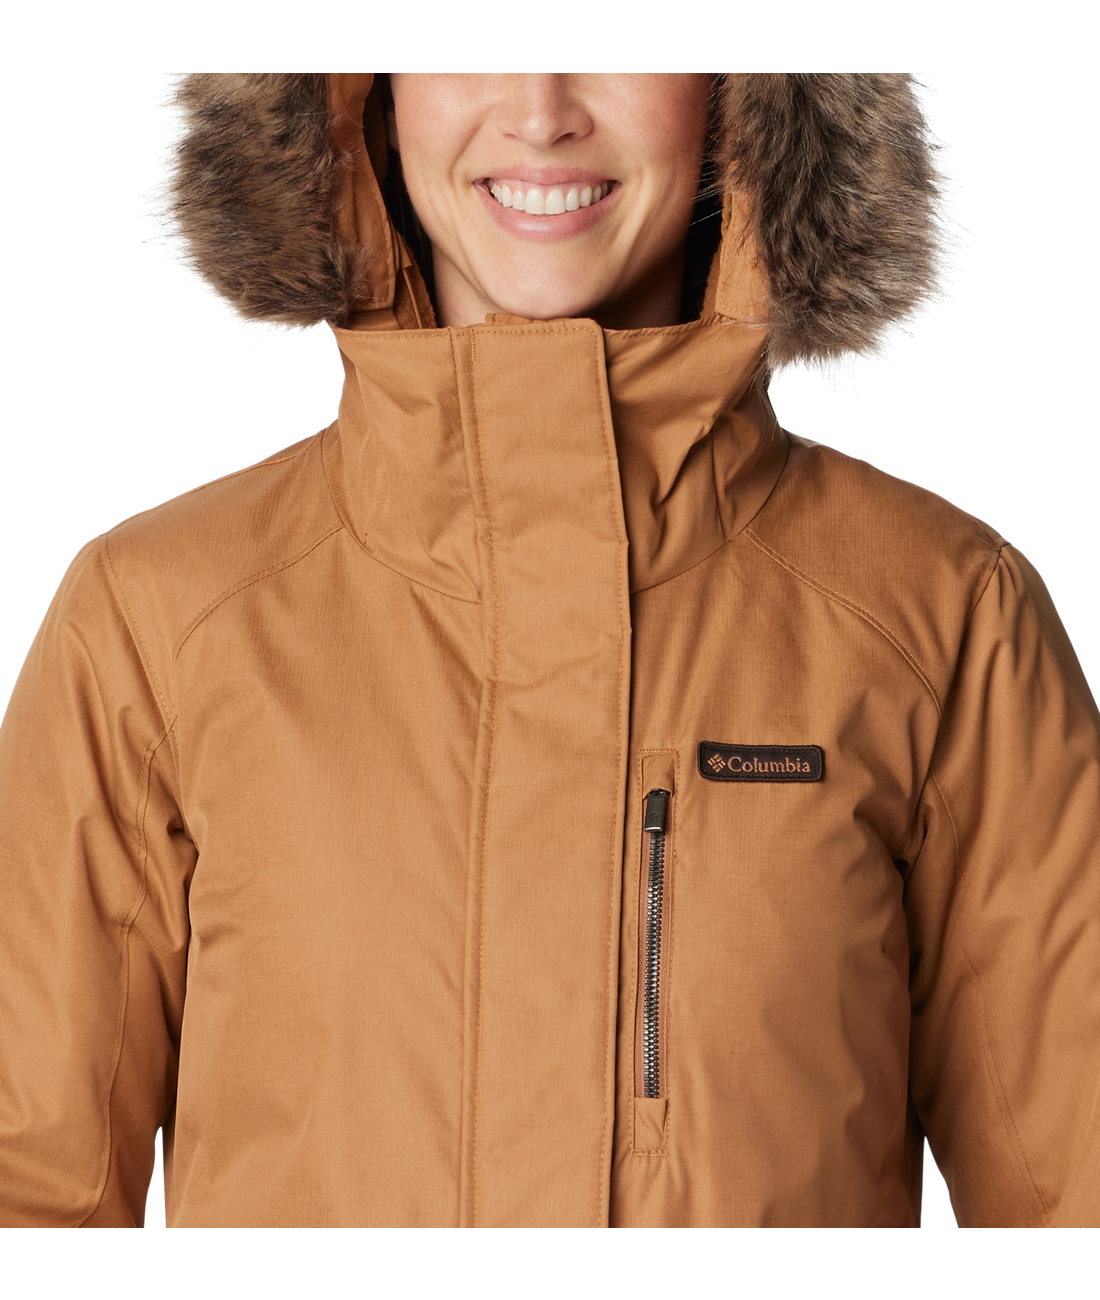 Suttle Mountain Long Insulated Jacket